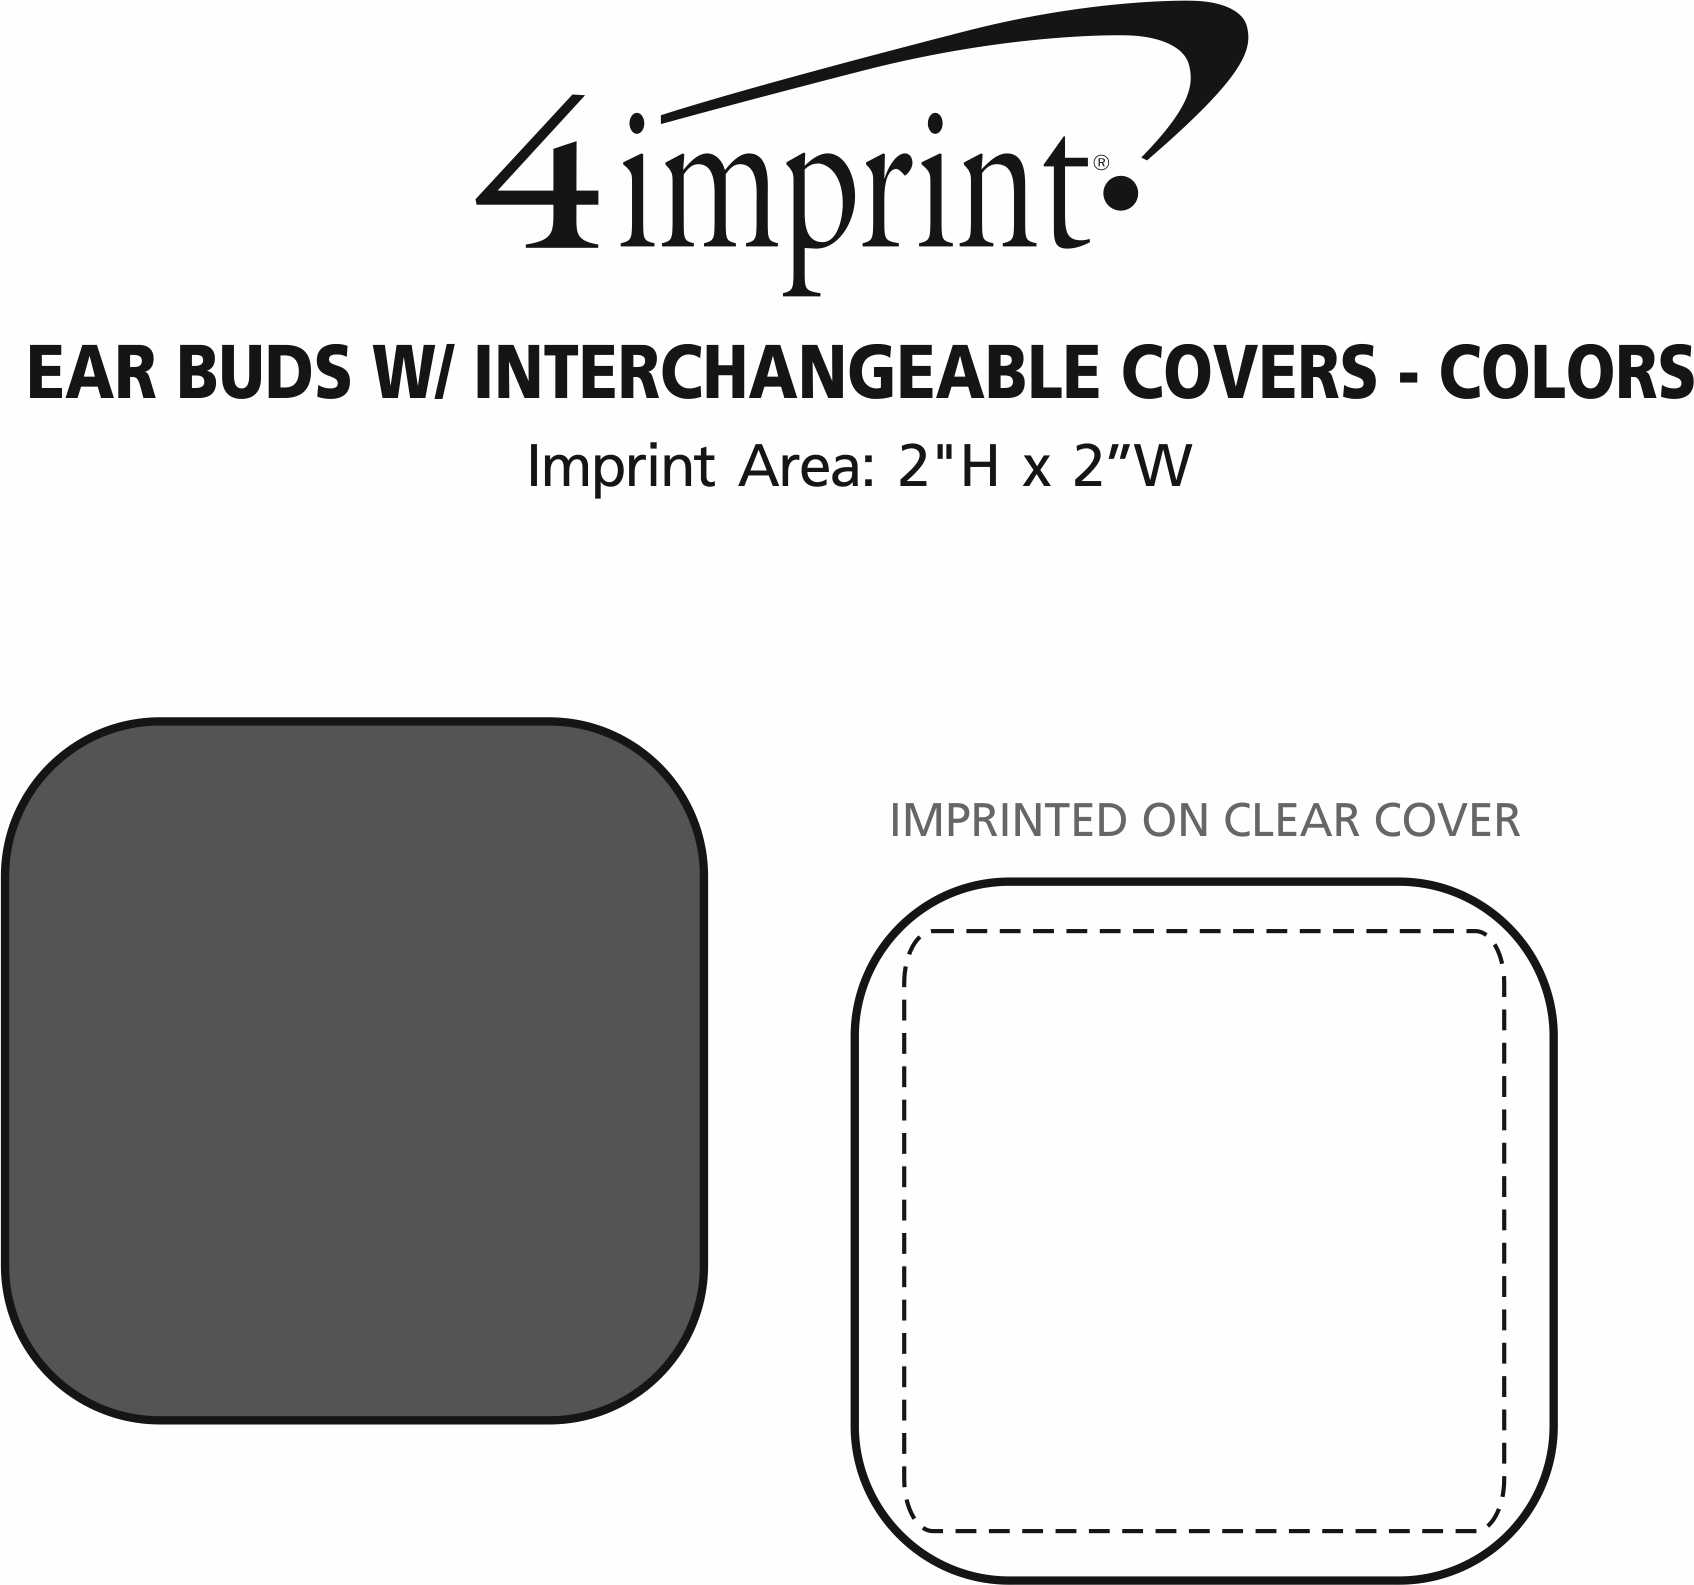 Imprint Area of Ear Buds with Interchangeable Covers - Colors